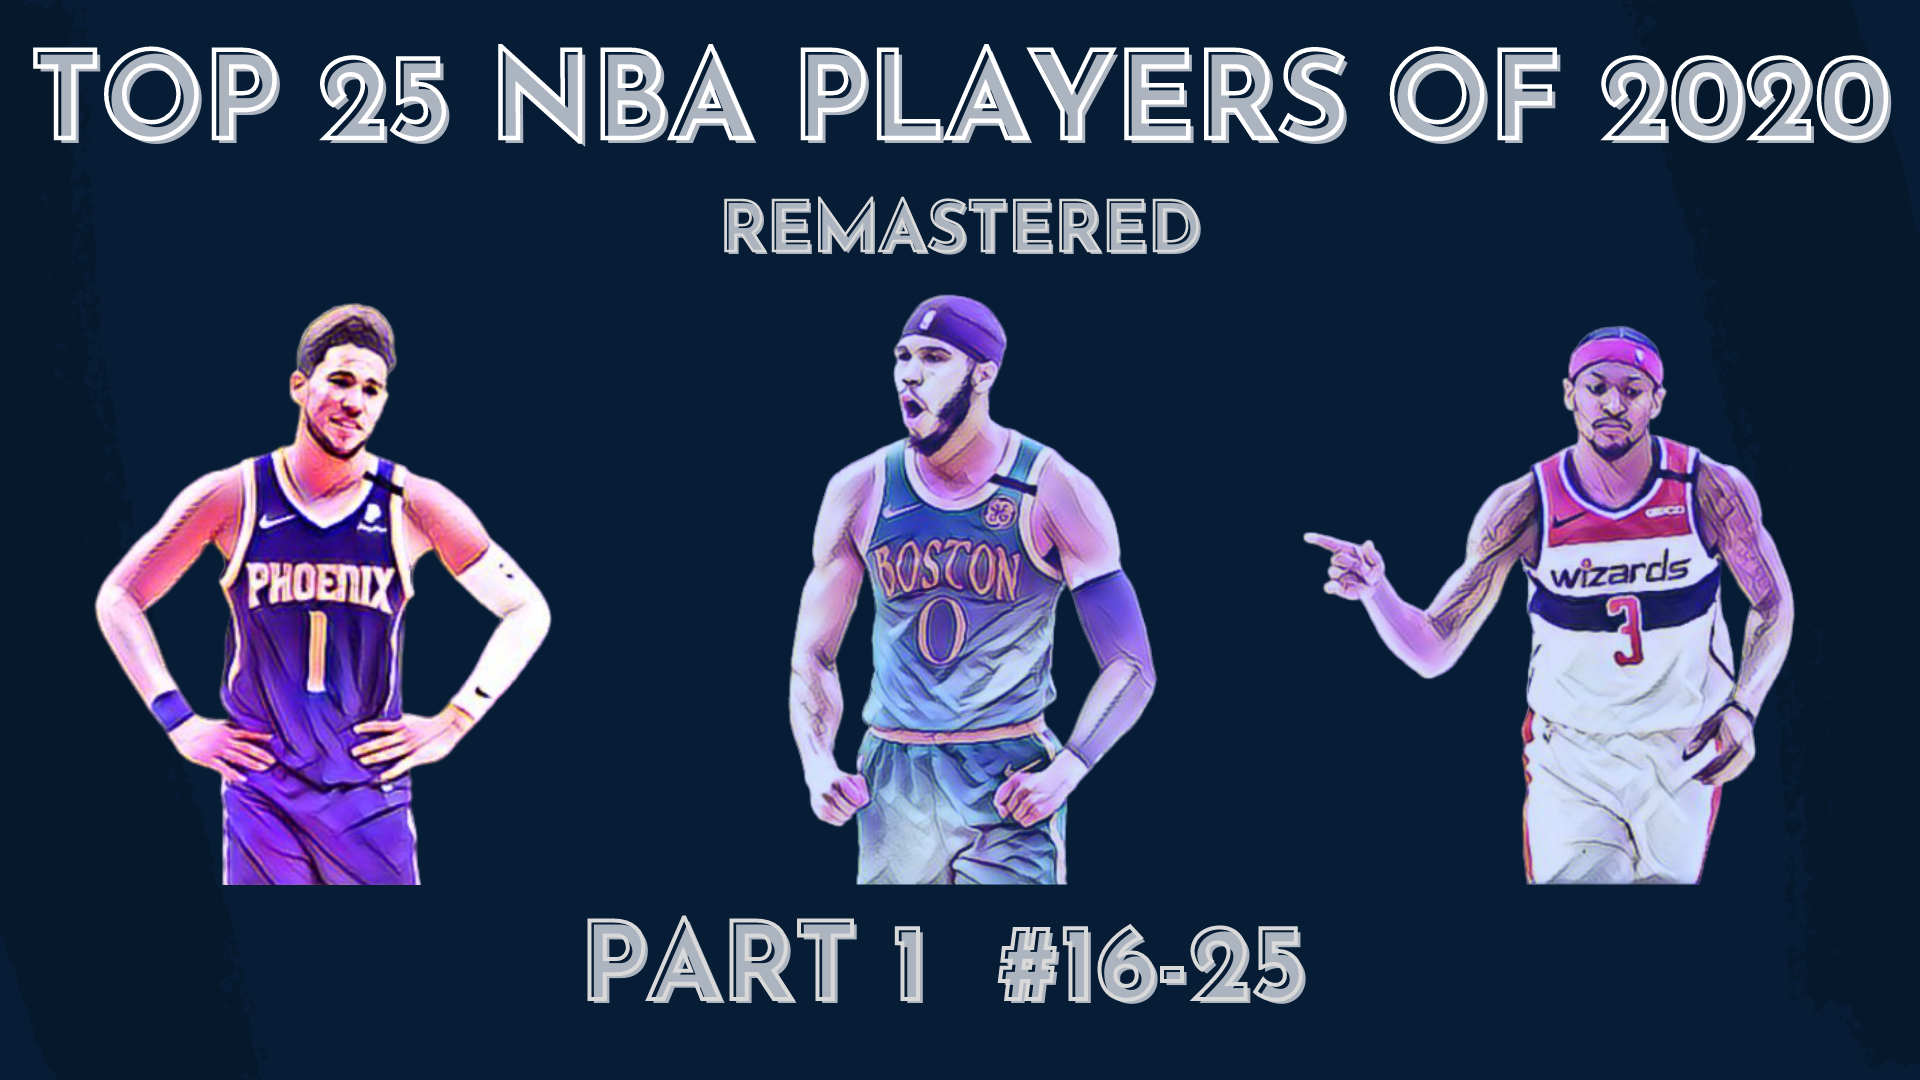 The Top 25 NBA Players of 2020 – A Remastered List (Part 1 #16-25)